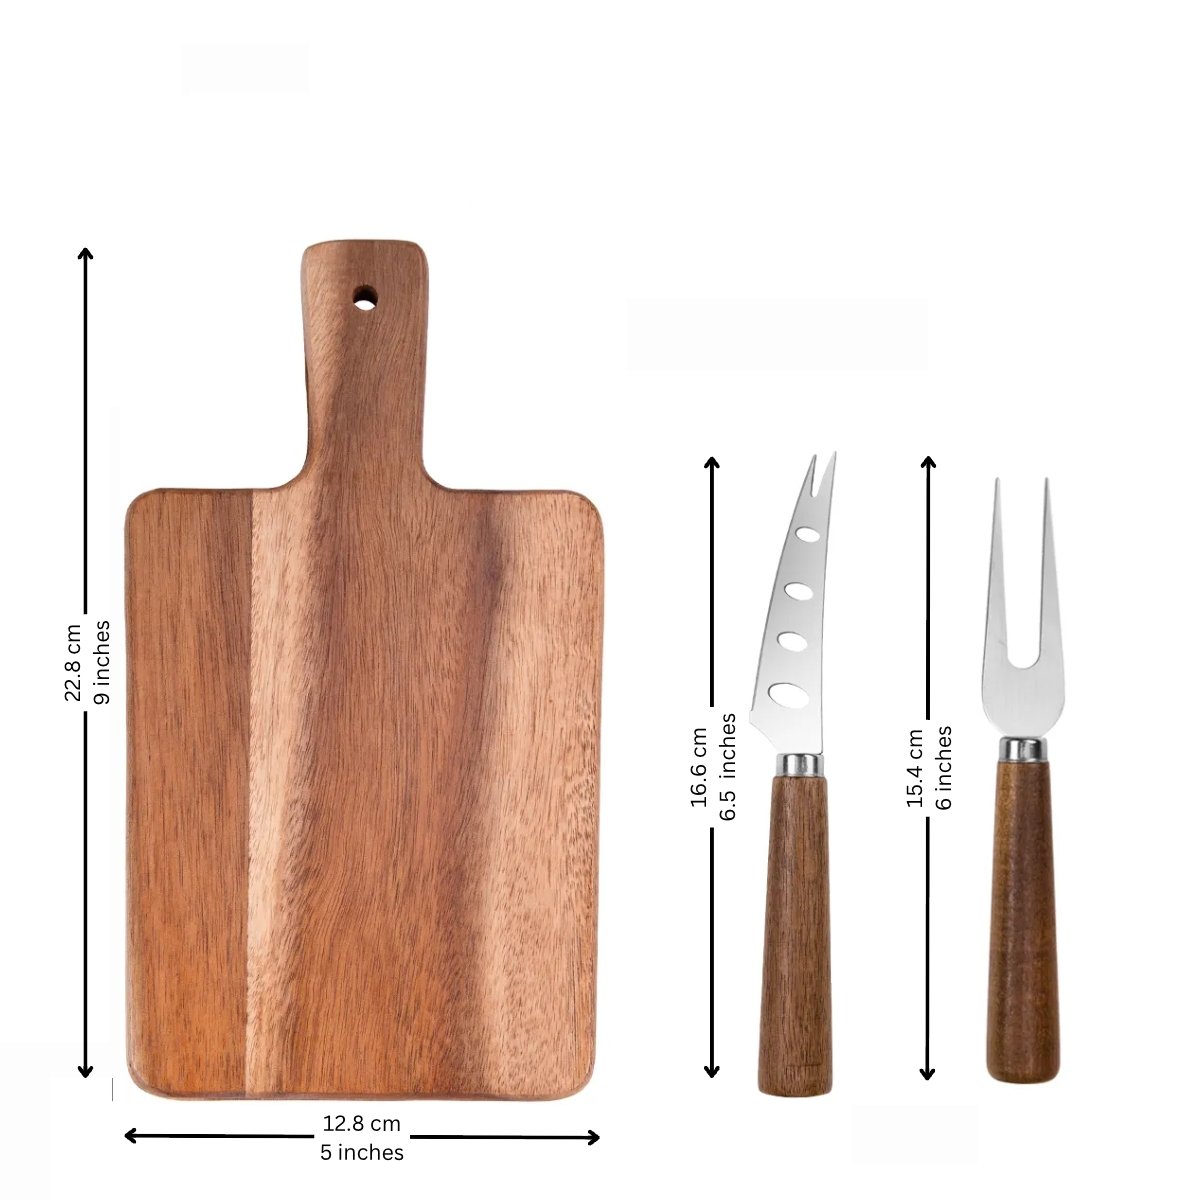 Gift Box Acacia Wood Cheese Cutting Board with Cheese Knife Set - Rustic Furniture Outlet